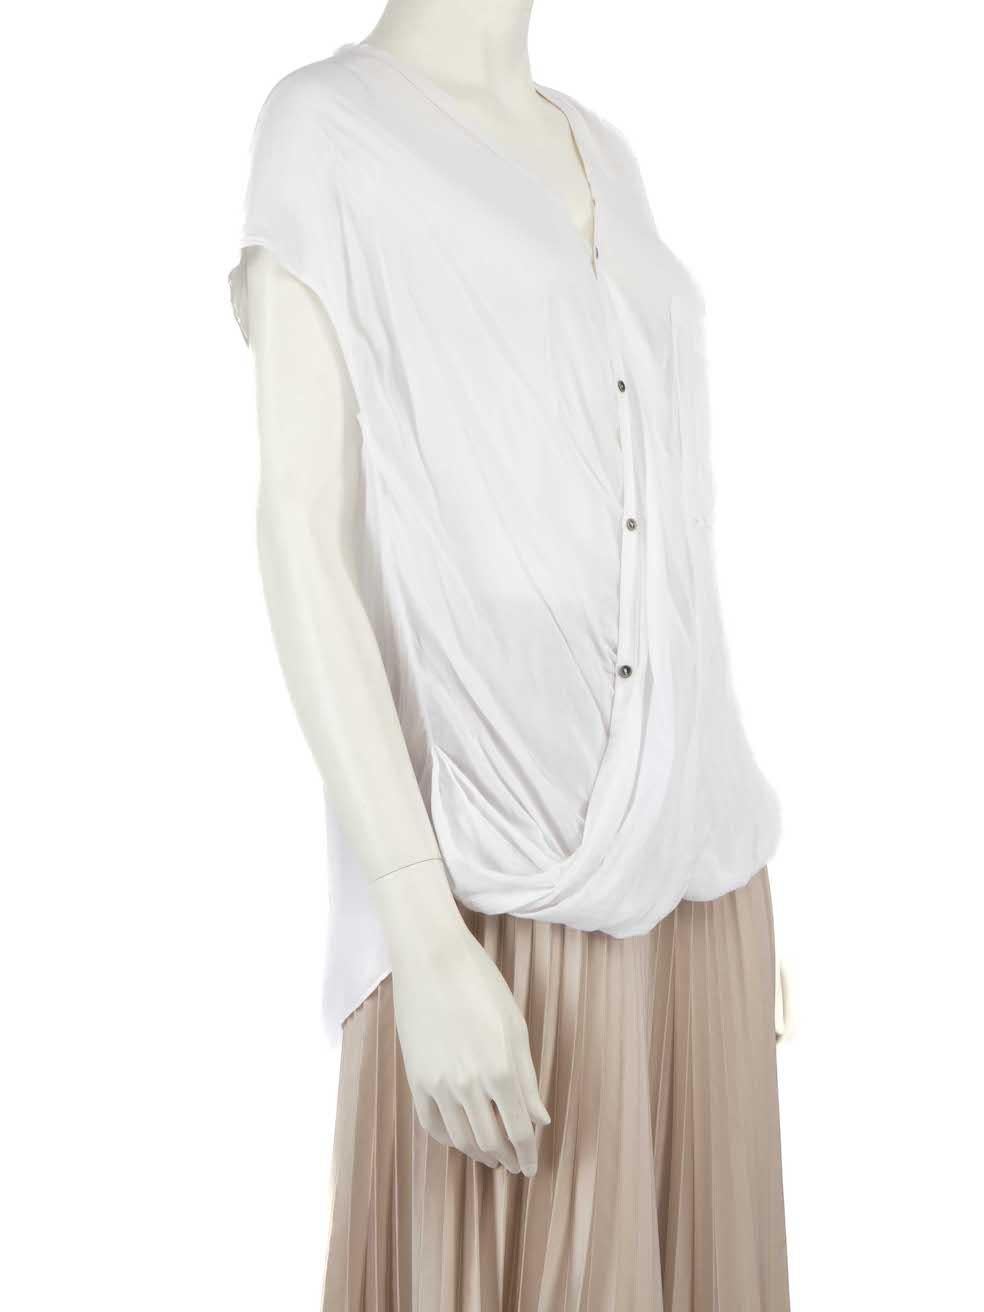 CONDITION is Very good. Hardly any visible wear to blouse is evident on this used Helmut Lang designer resale item.
 
 
 
 
 Details
 
 
 White
 
 Viscose
 
 Top
 
 Sheer
 
 Short sleeves
 
 Front draped detail
 
 Button up fastening
 
 V-neck
 
